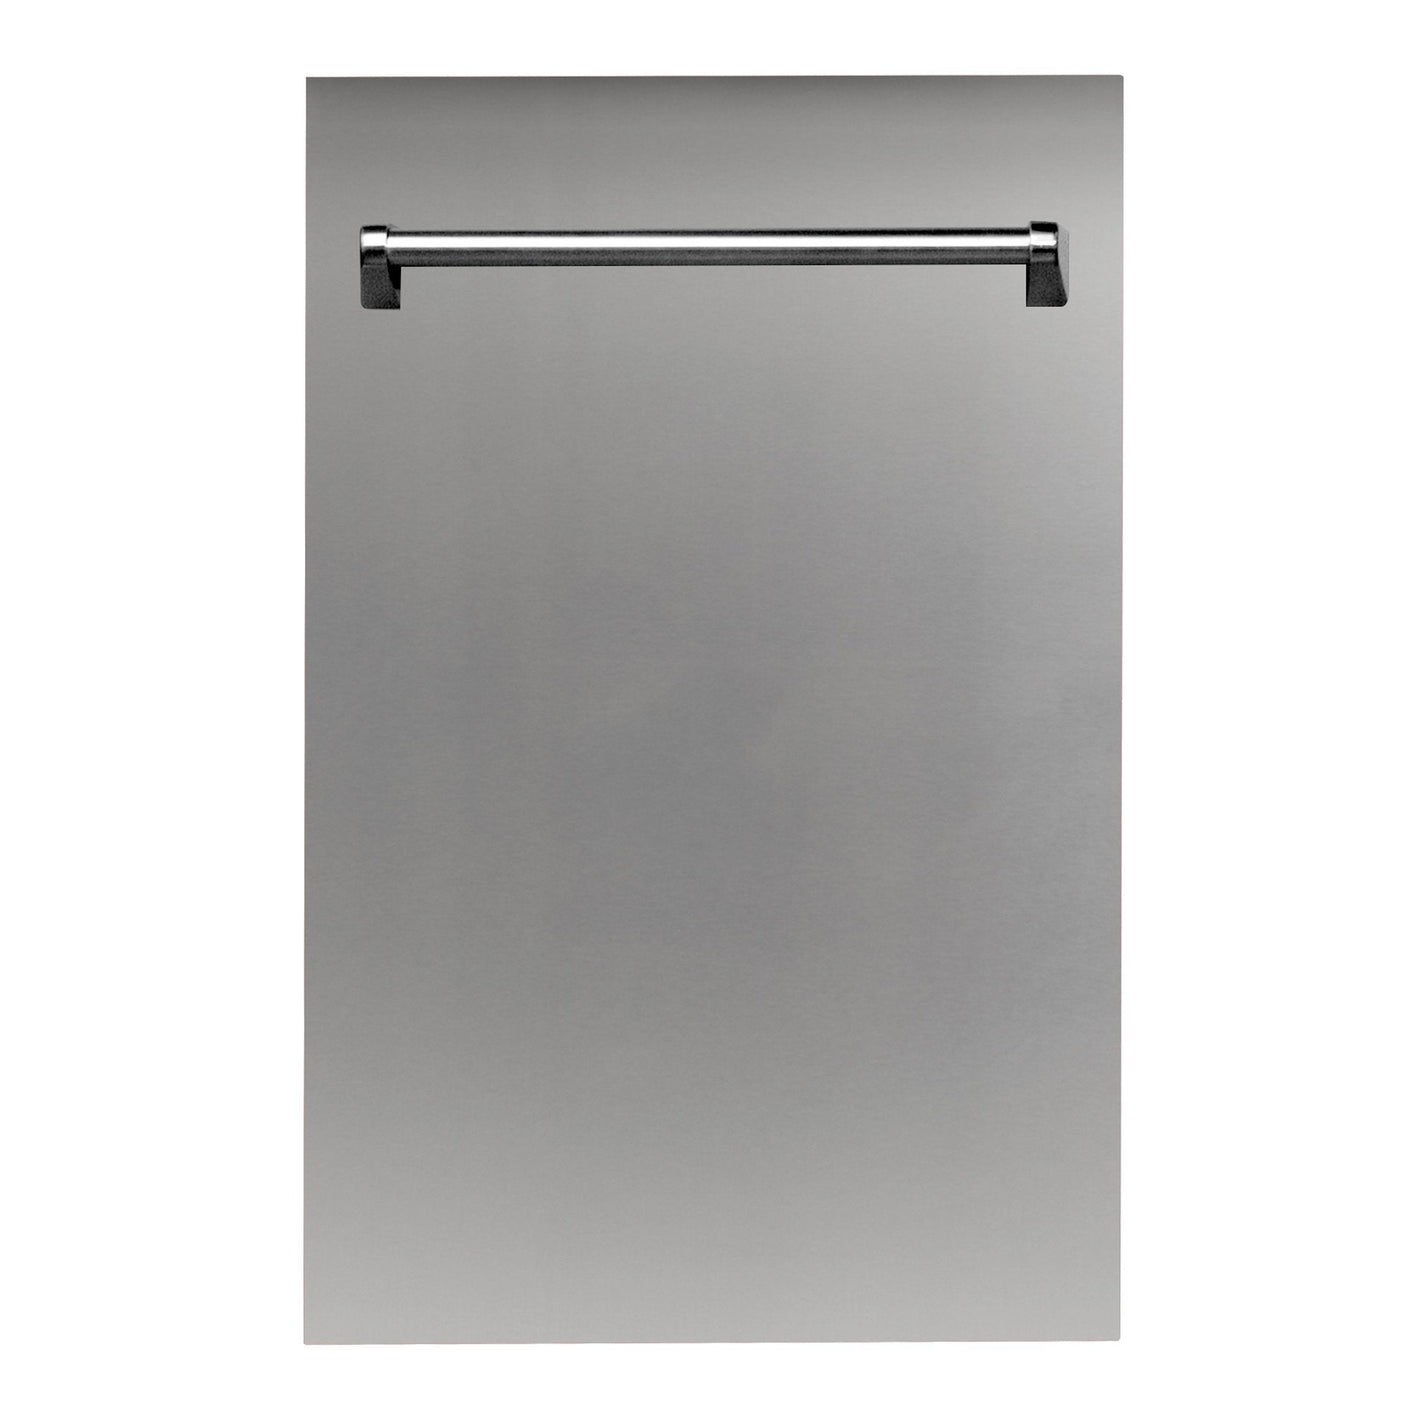 ZLINE 18 in. Dishwasher Panel with Traditional Handle (DP-18) [Color: Blue Matte]